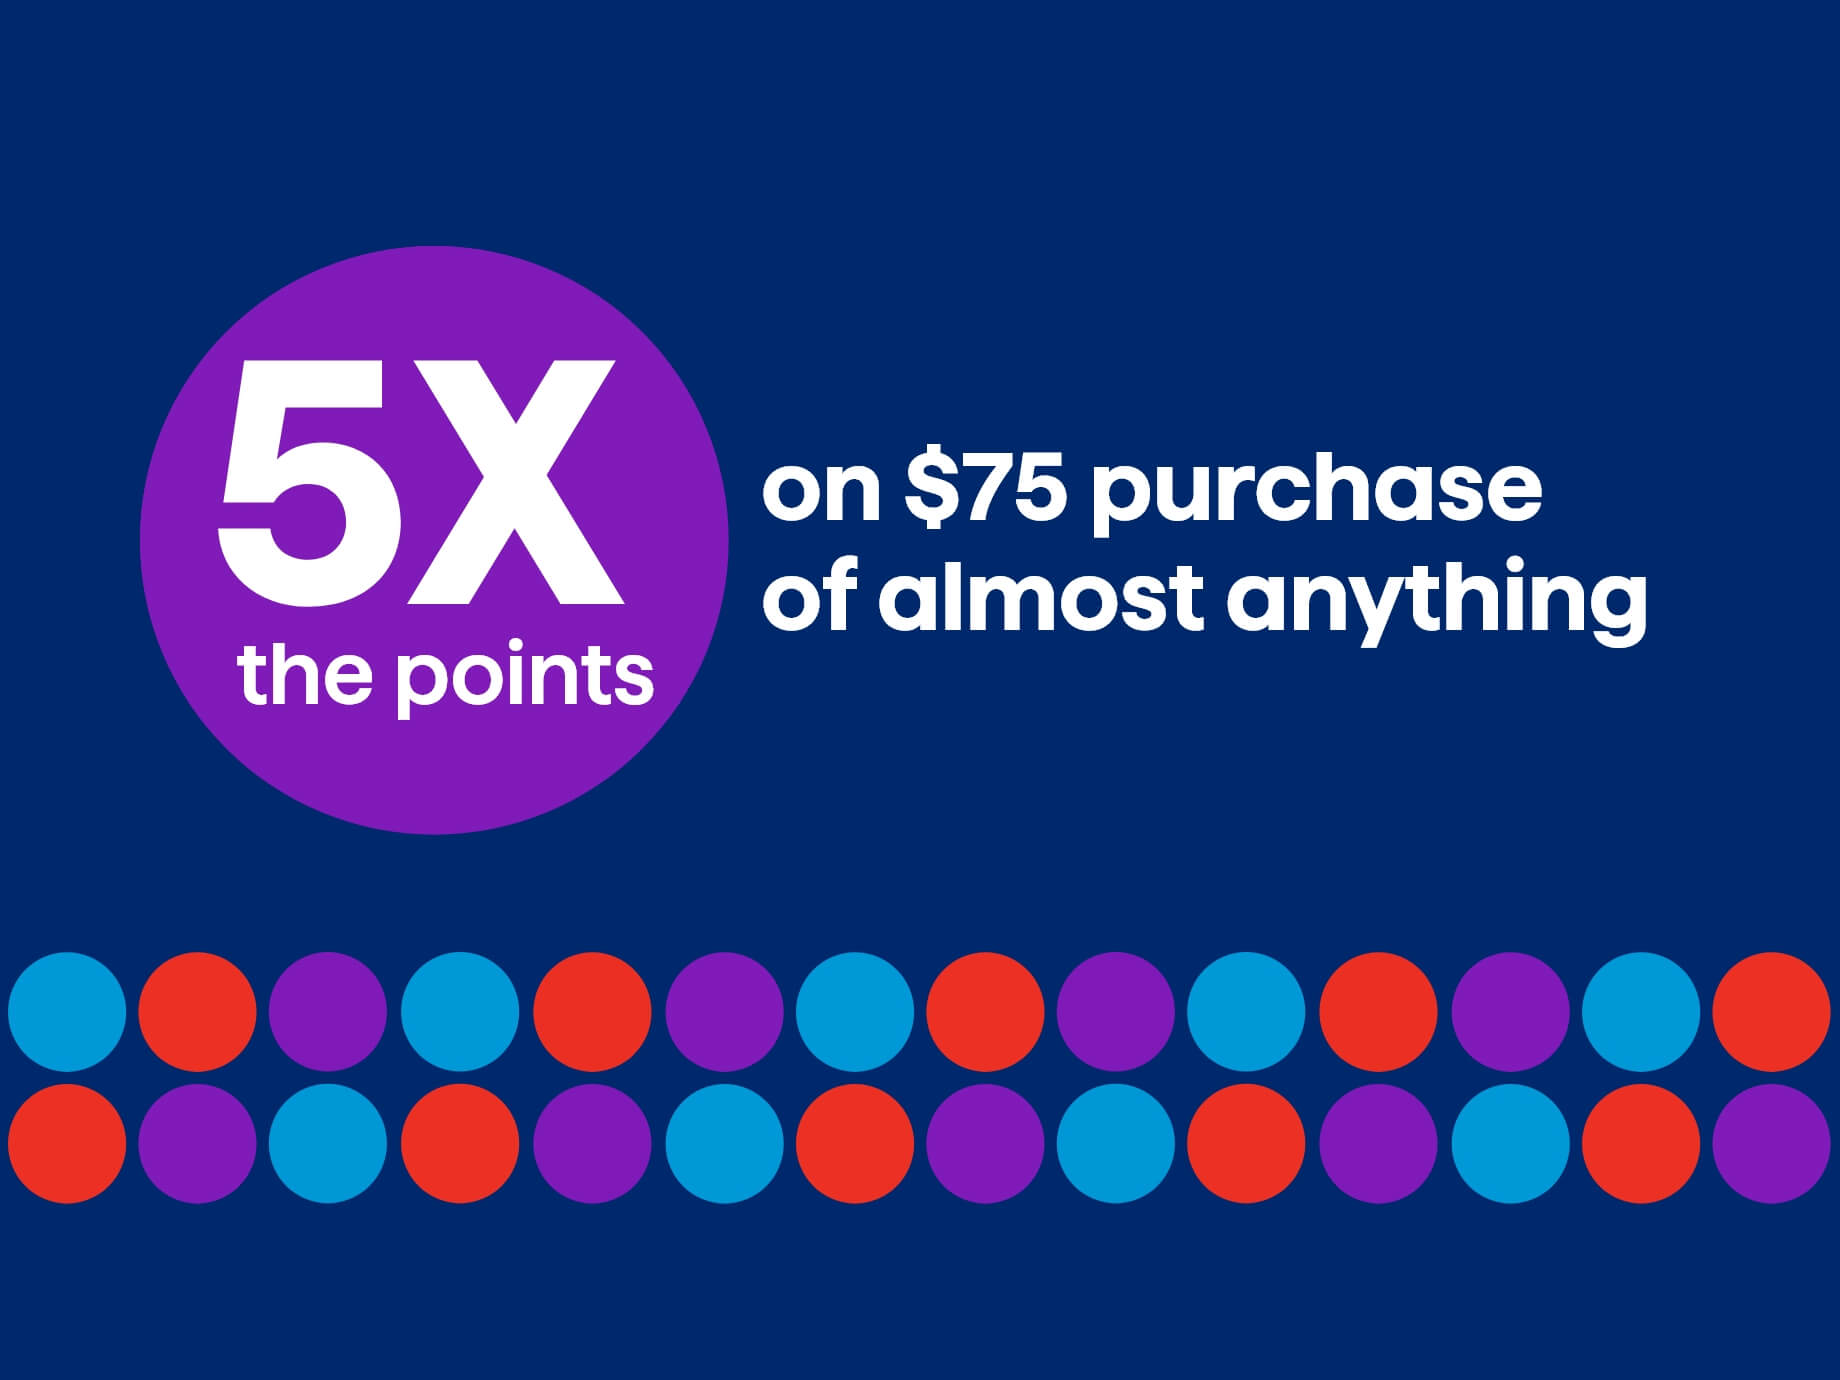 5x points on $75 purchase of almost anything